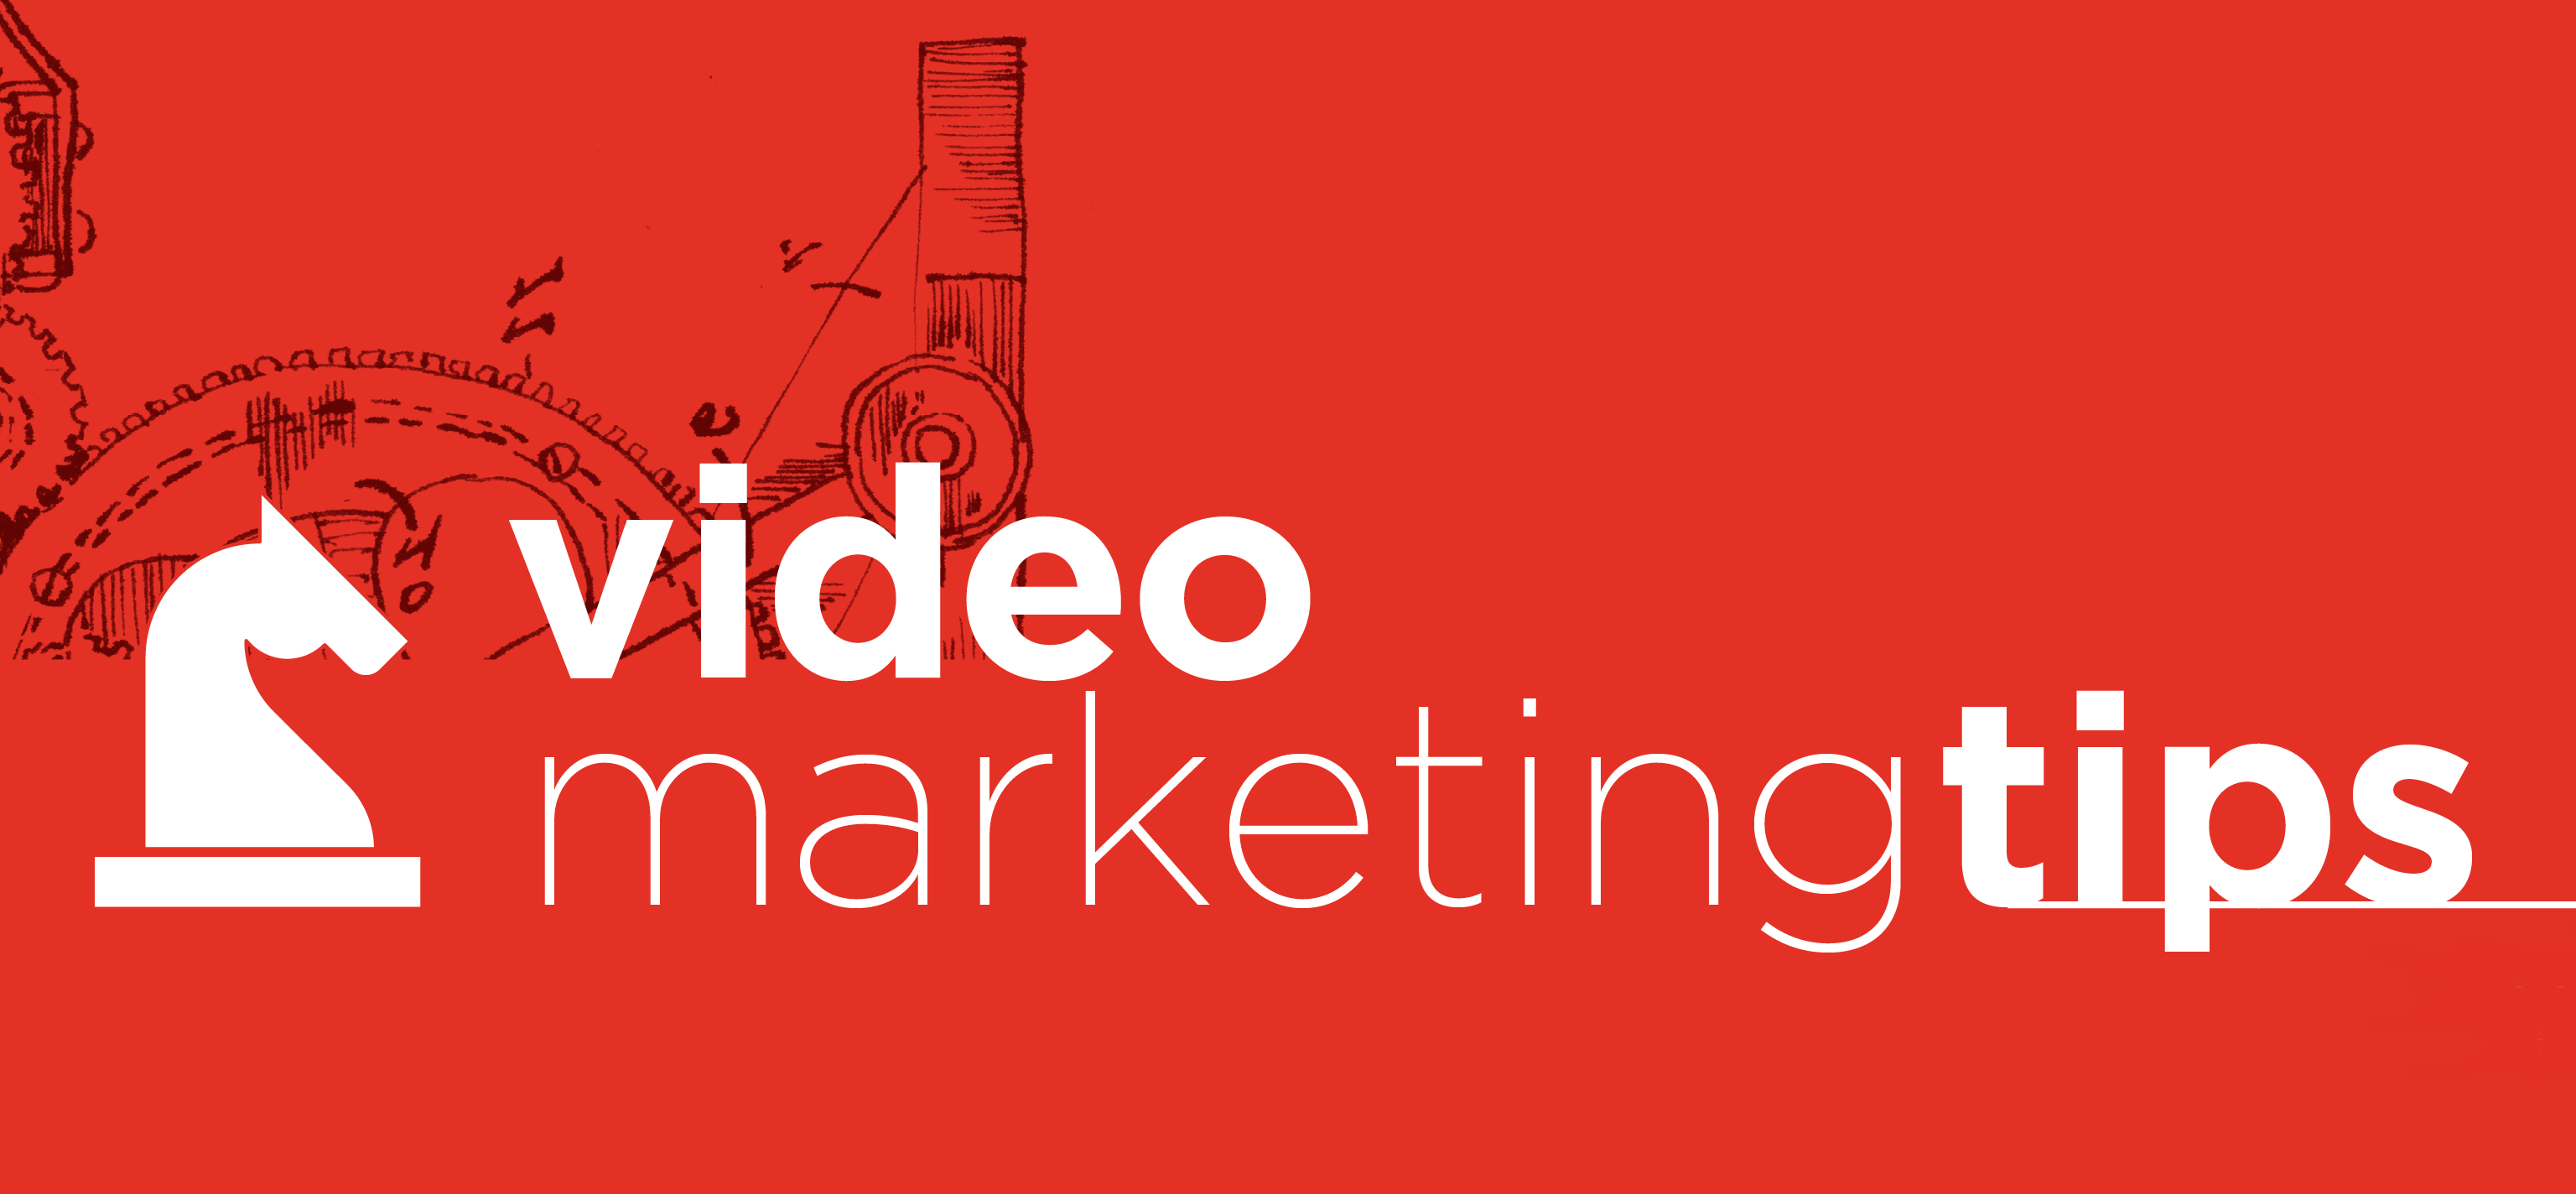 Tips For Video Marketing